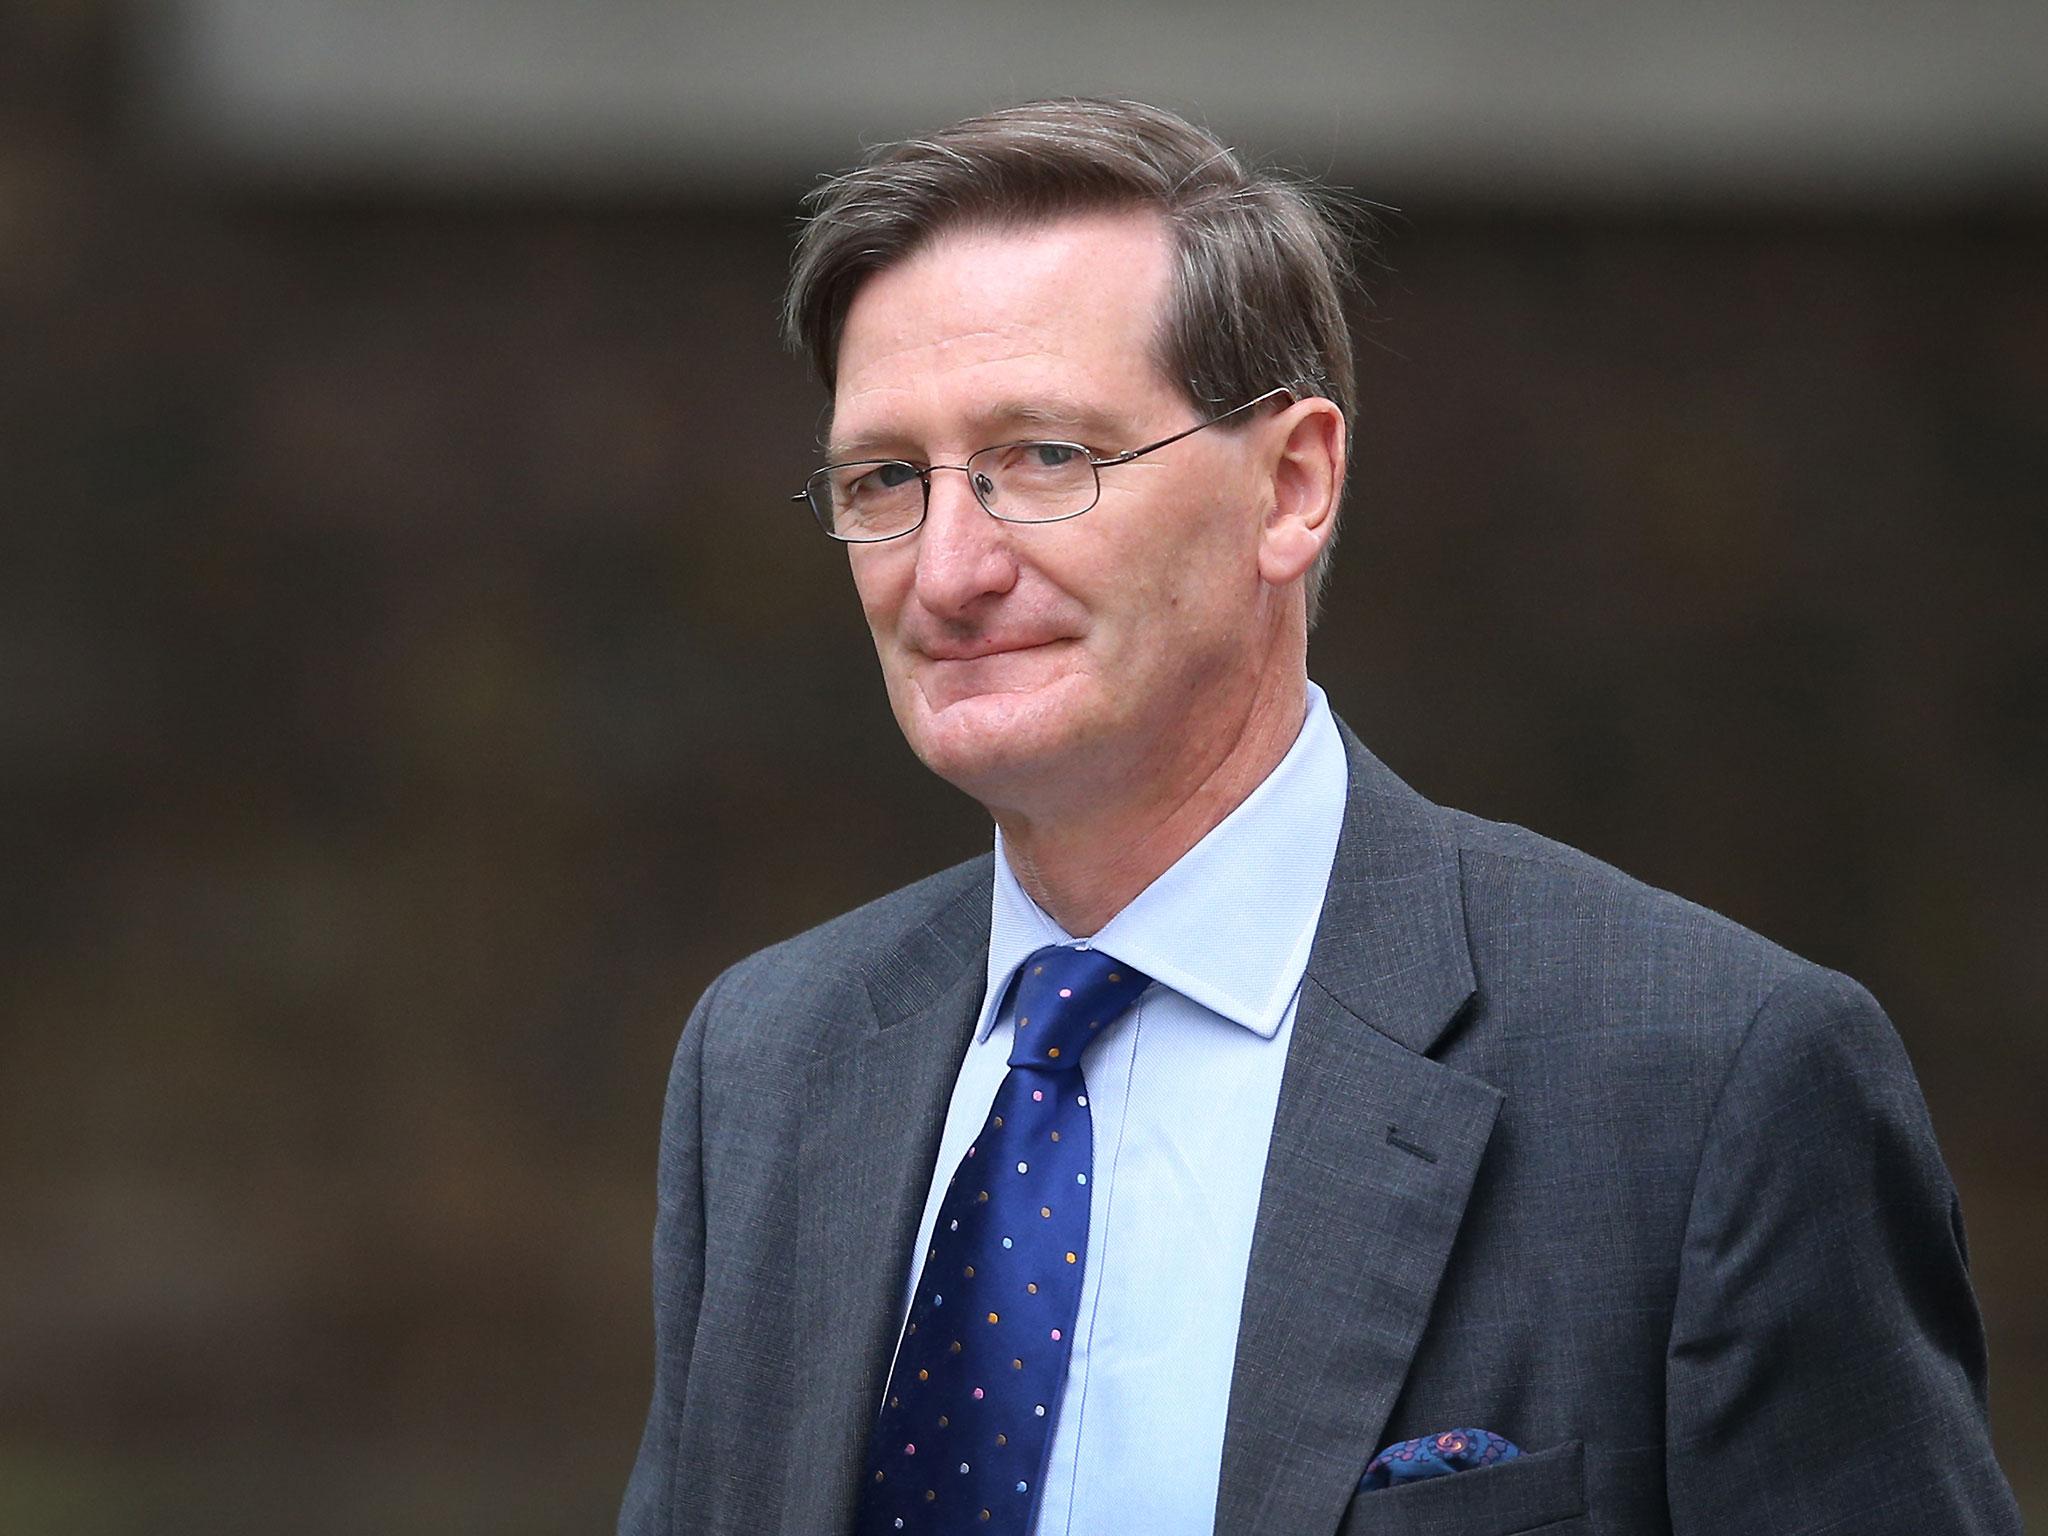 Dominic Grieve’s office said the move was not prompted by any particular cases